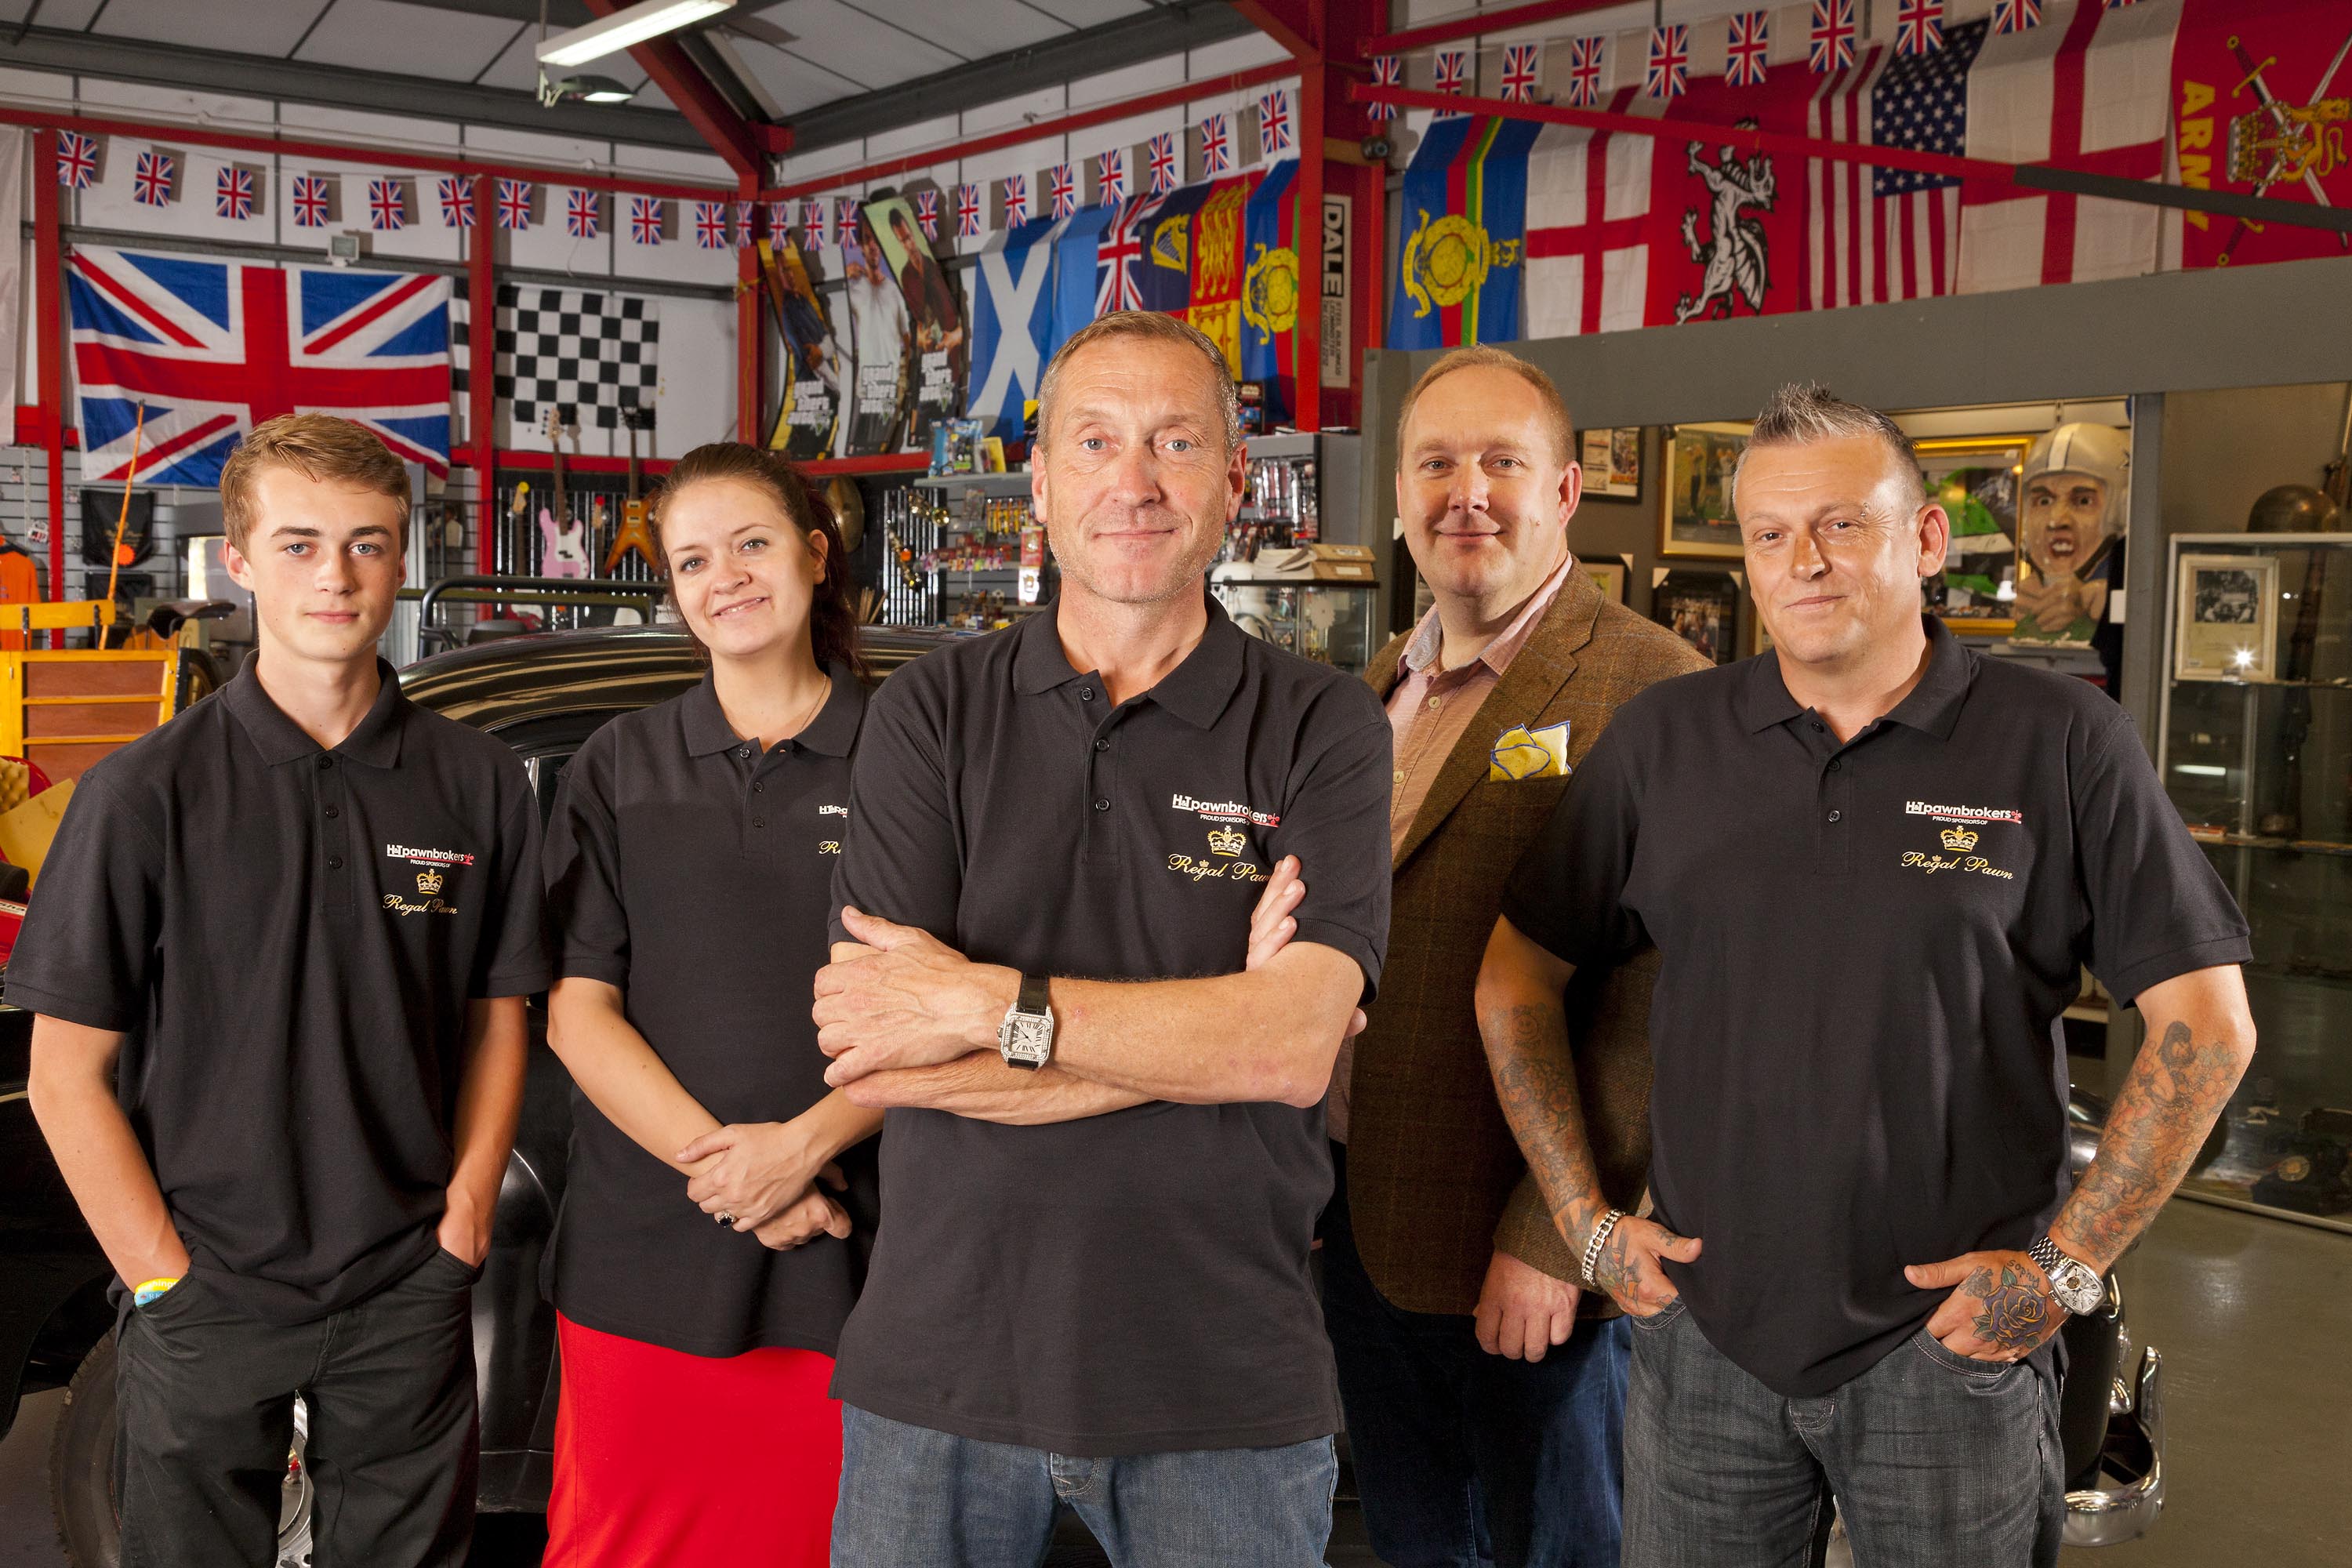 Pawn Stars UK at H&T store in Liverpool.